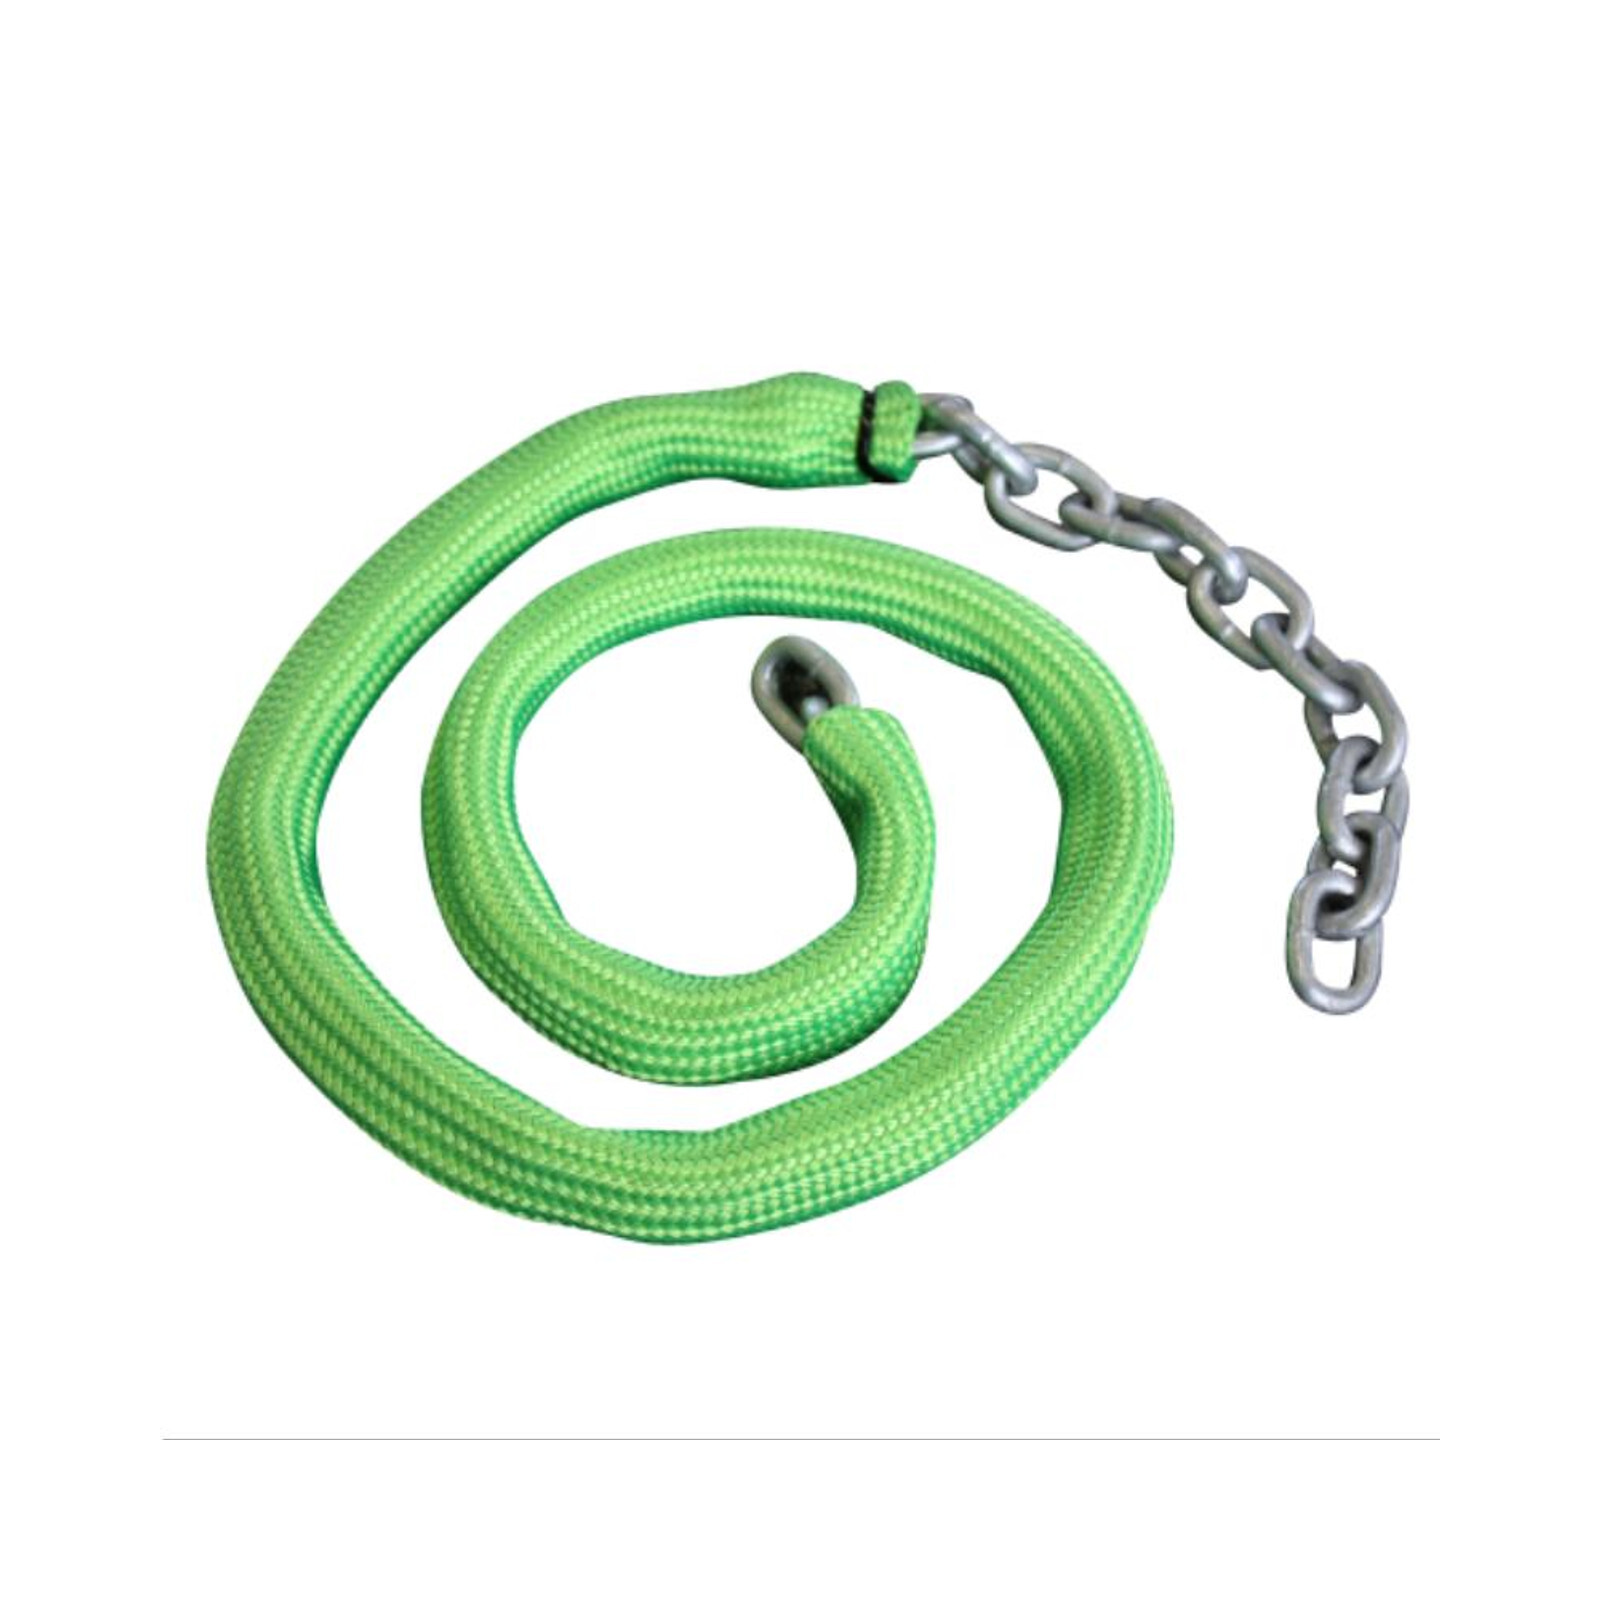 Viper FLURO GREEN Chain Sock To Suit 6mm Short Link Chain